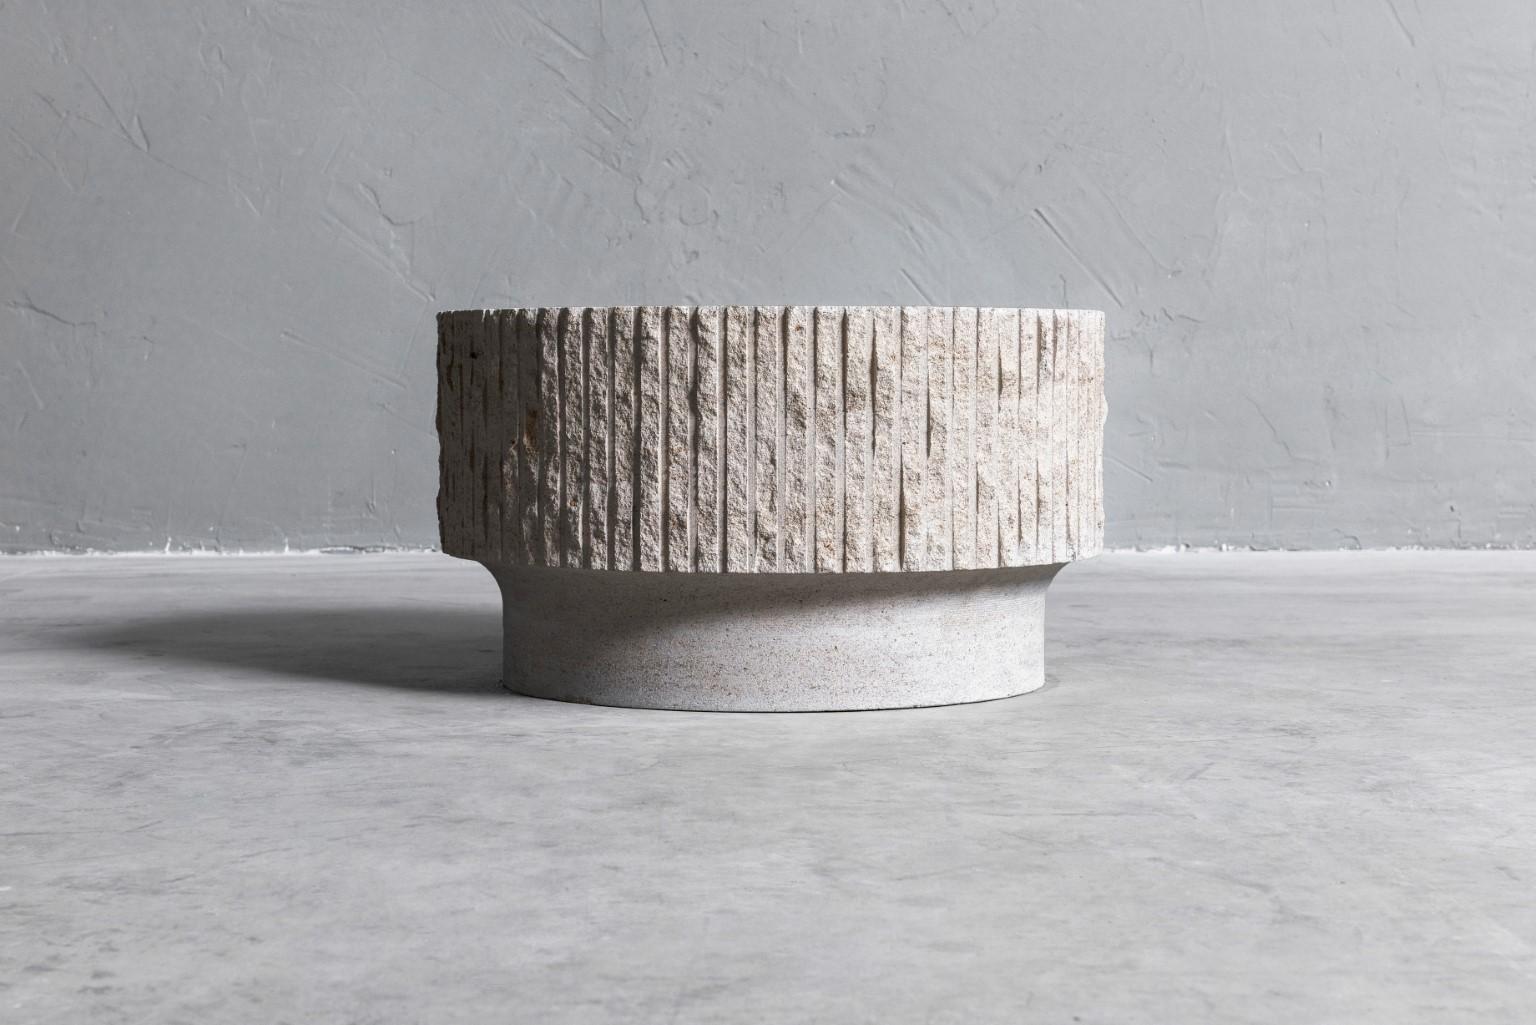 Limestone and brass sculpted coffee table by Frederic Saulou
Small coffee table
Materials: Buffon Limestone, patinated brass
H 44, D 35 cm, approximately 70 kg
Limited edition of 12
Title: Ambigue
Signed and numbered.

